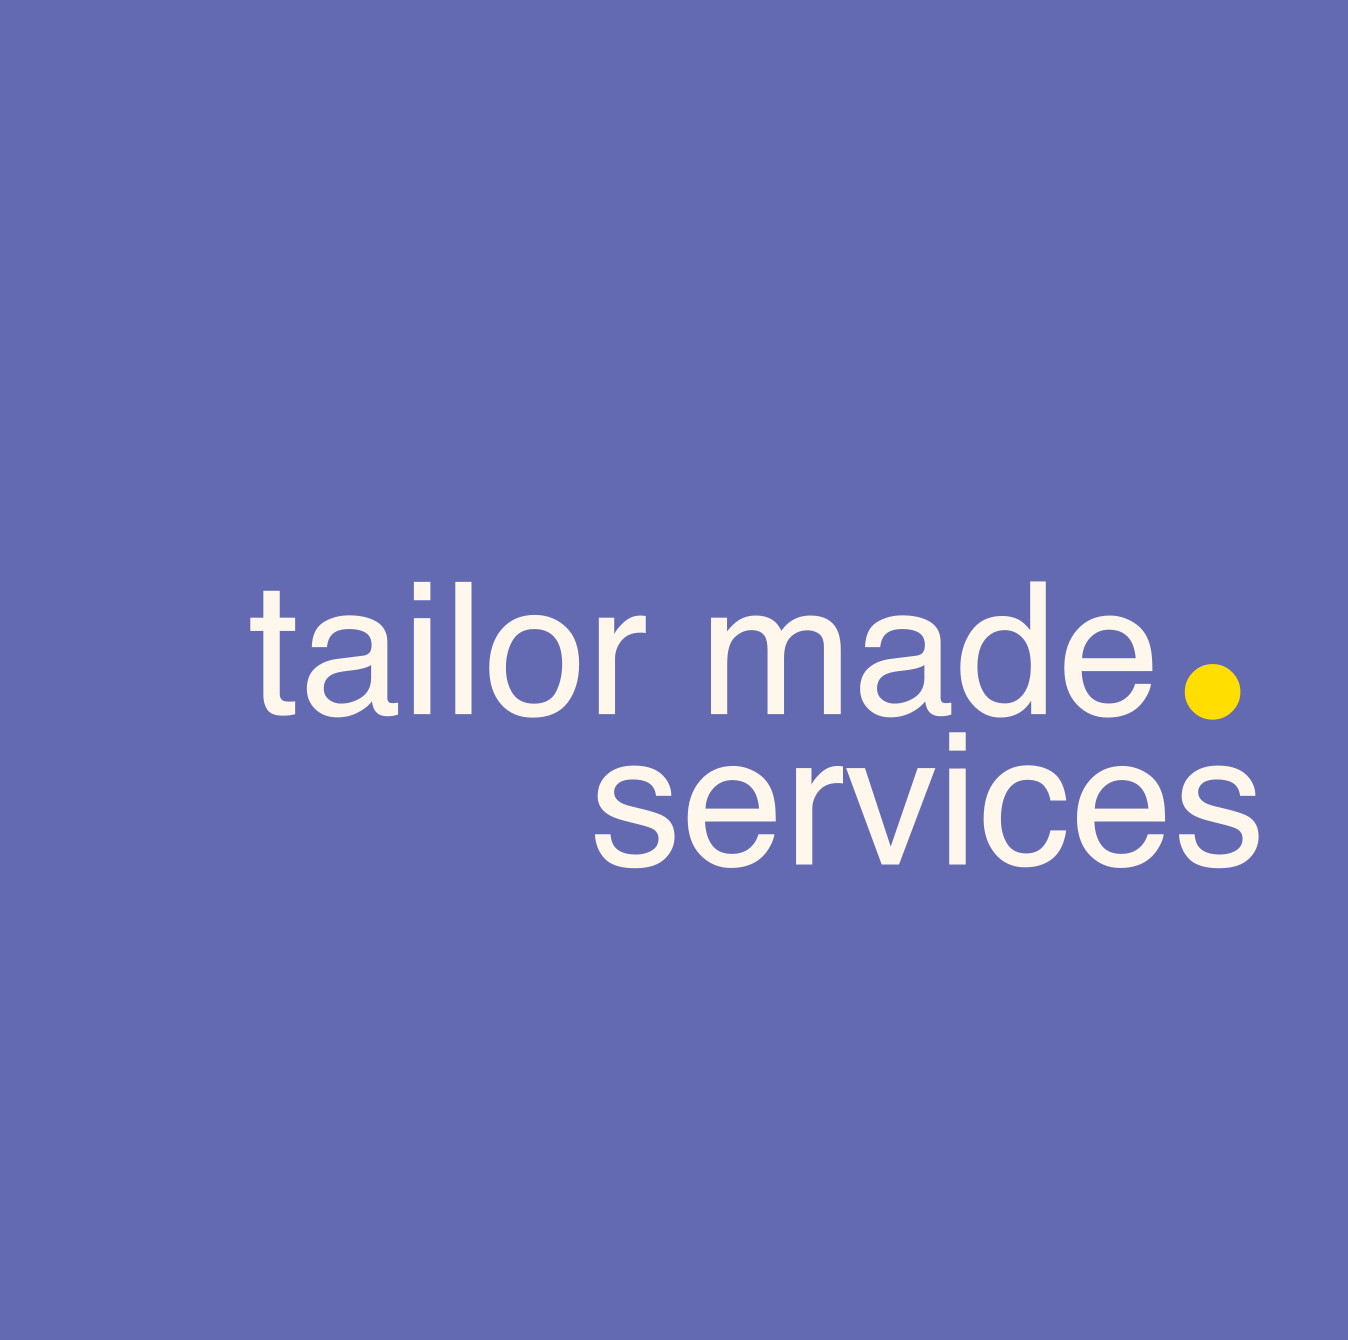 Tailor-made services